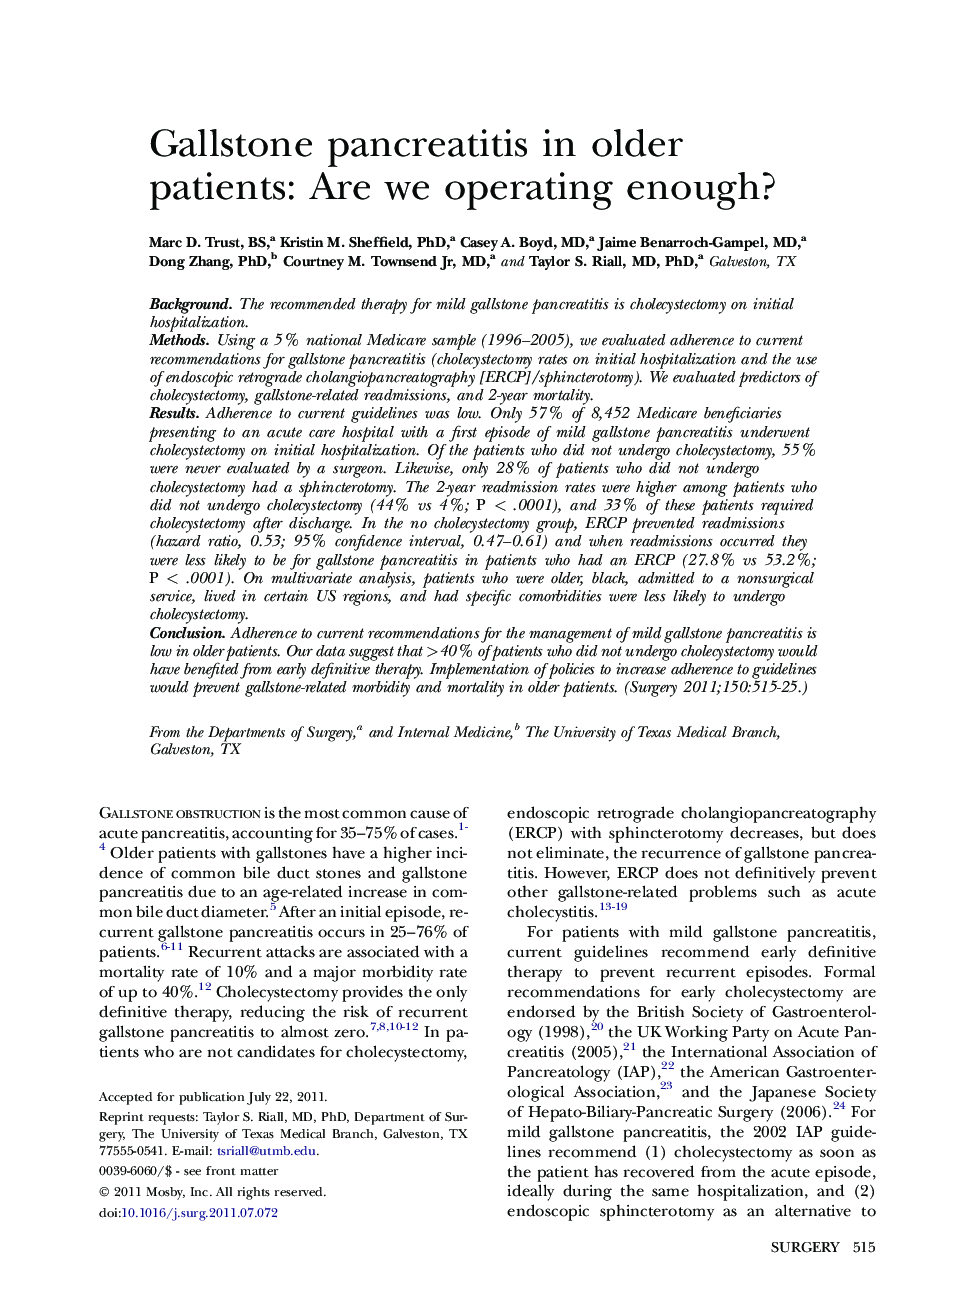 Gallstone pancreatitis in older patients: Are we operating enough?